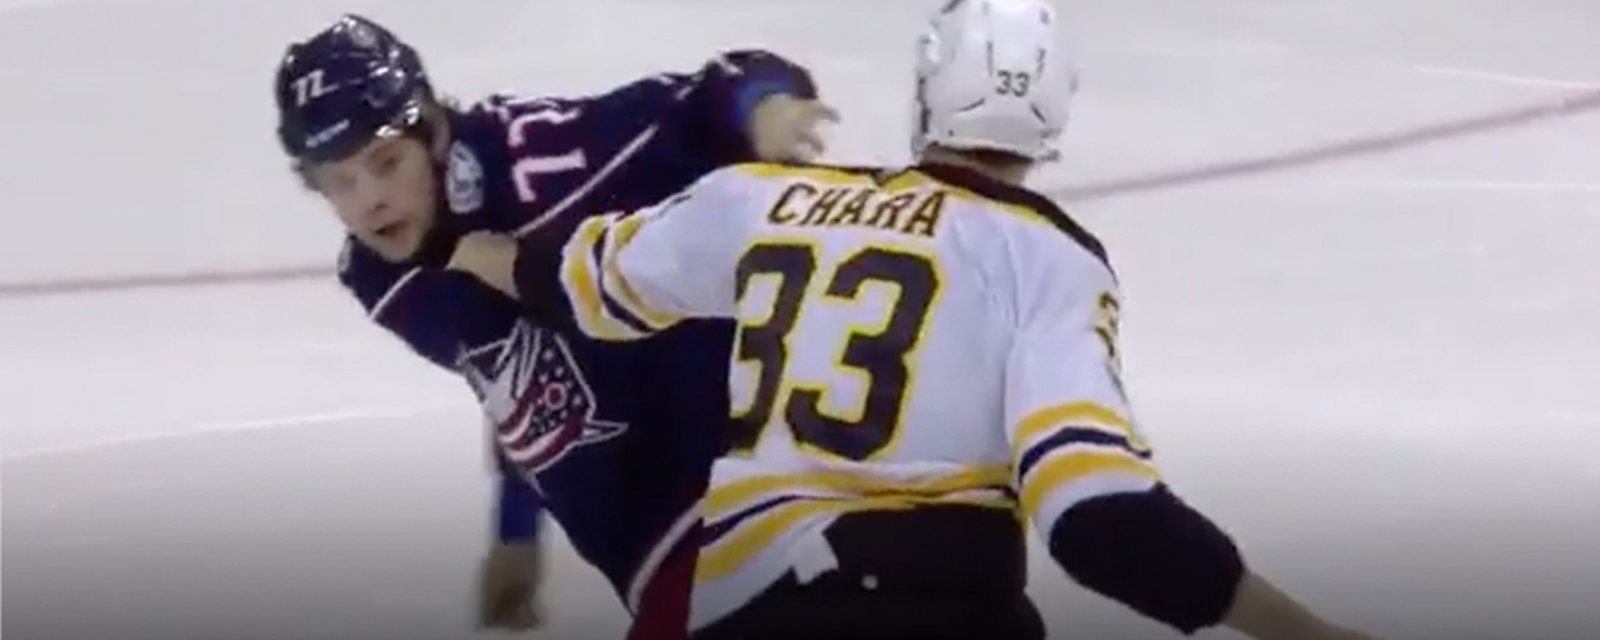 Must See: Chara leaves Anderson bloodied and battered